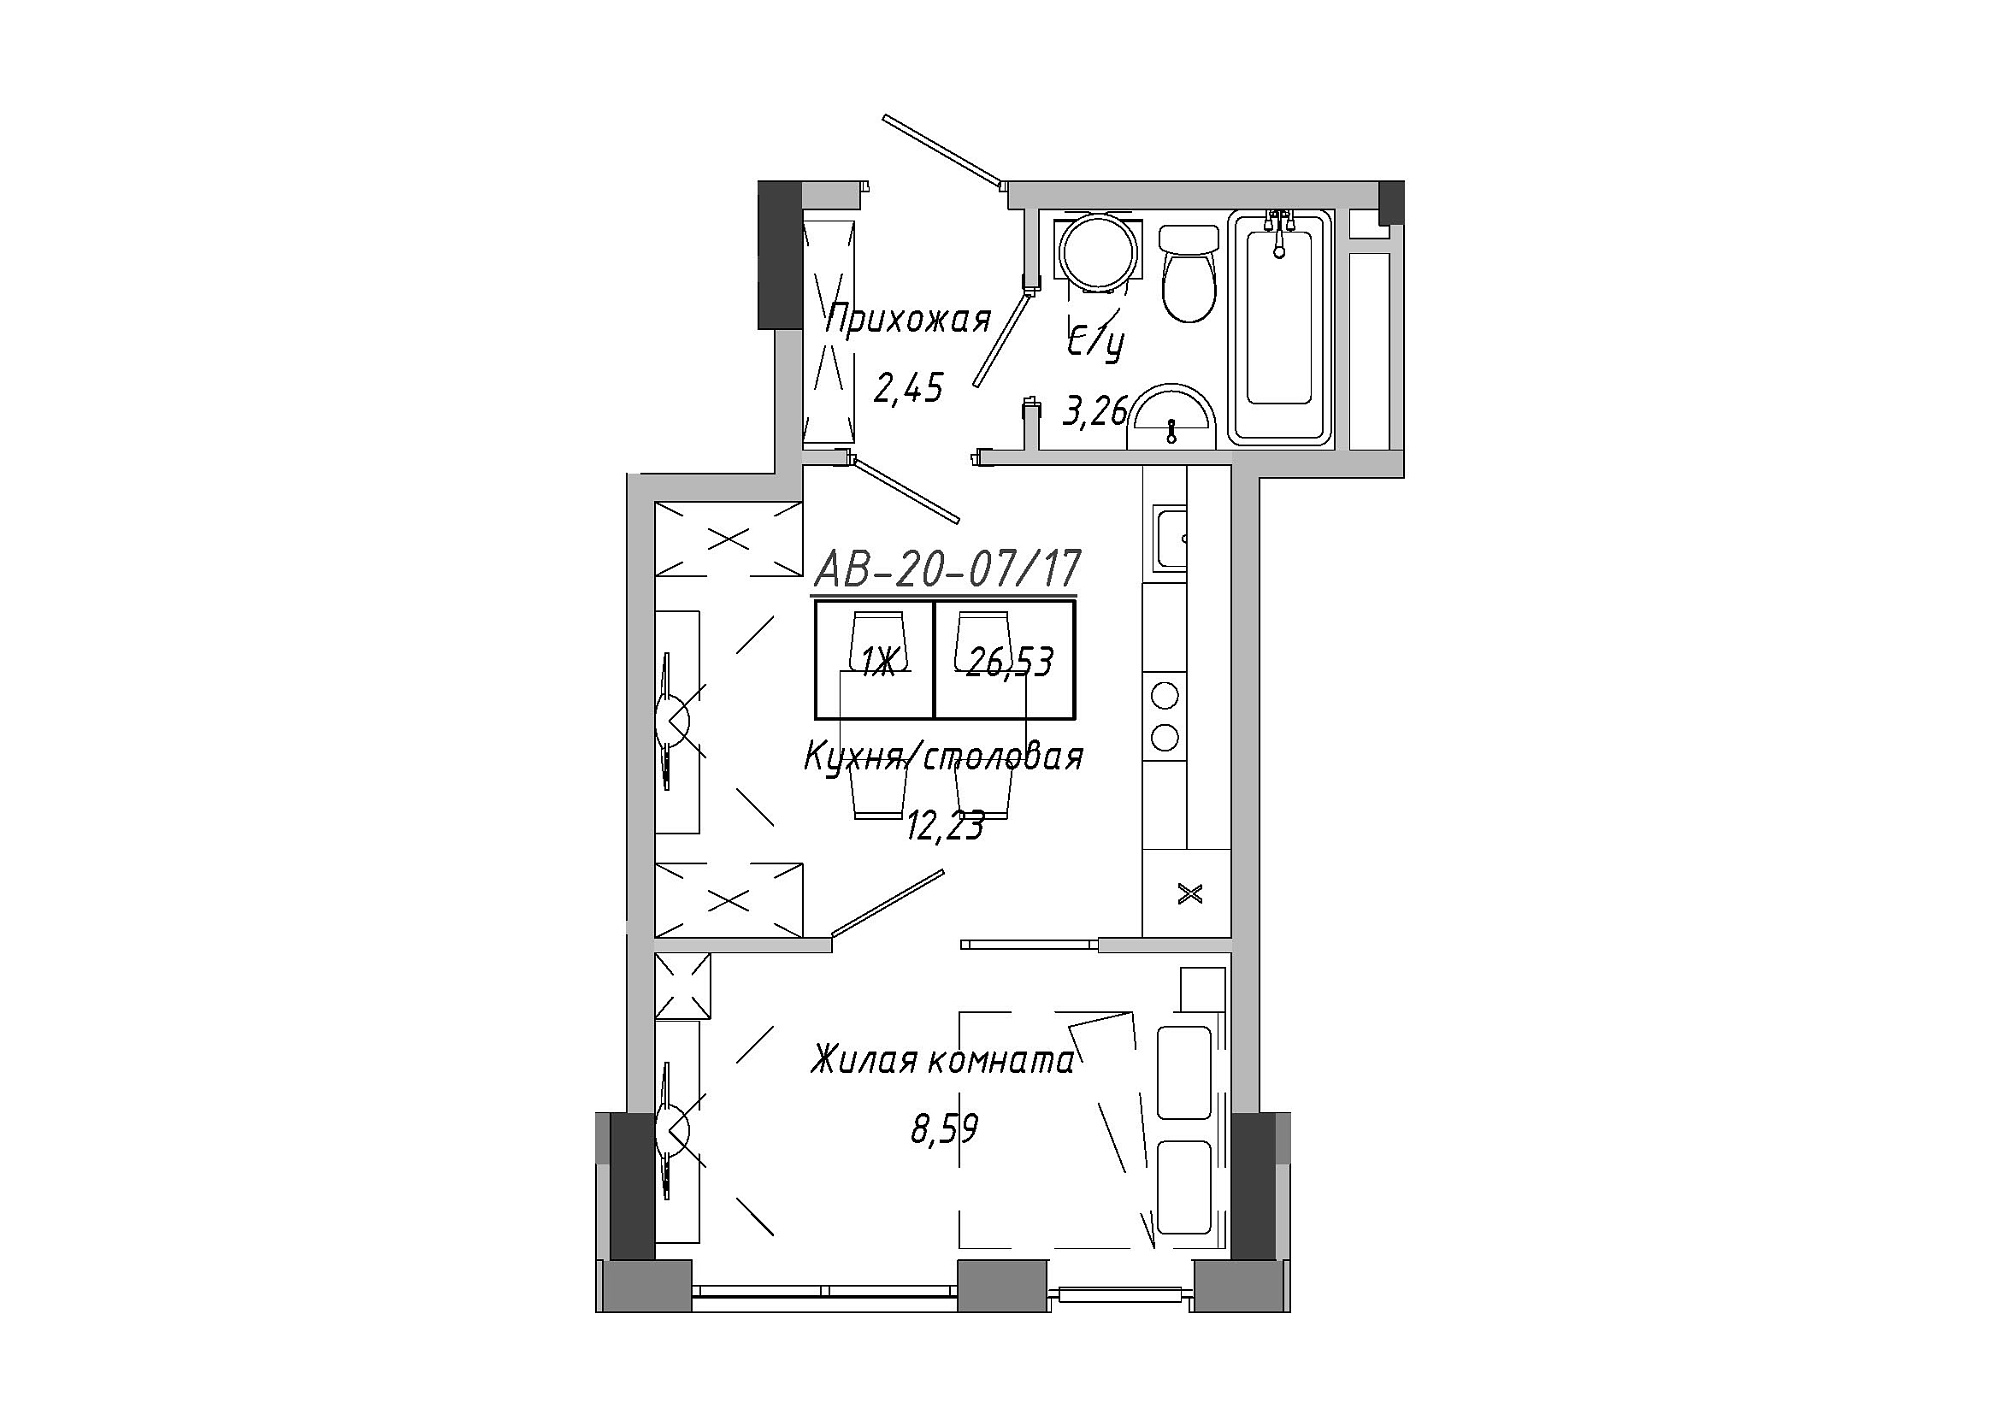 Planning 1-rm flats area 26.98m2, AB-20-07/00017.